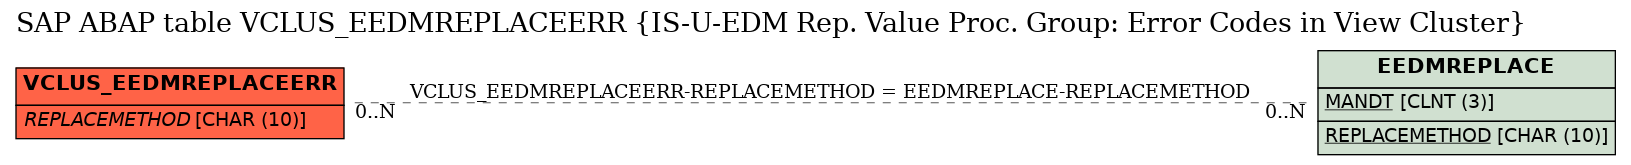 E-R Diagram for table VCLUS_EEDMREPLACEERR (IS-U-EDM Rep. Value Proc. Group: Error Codes in View Cluster)